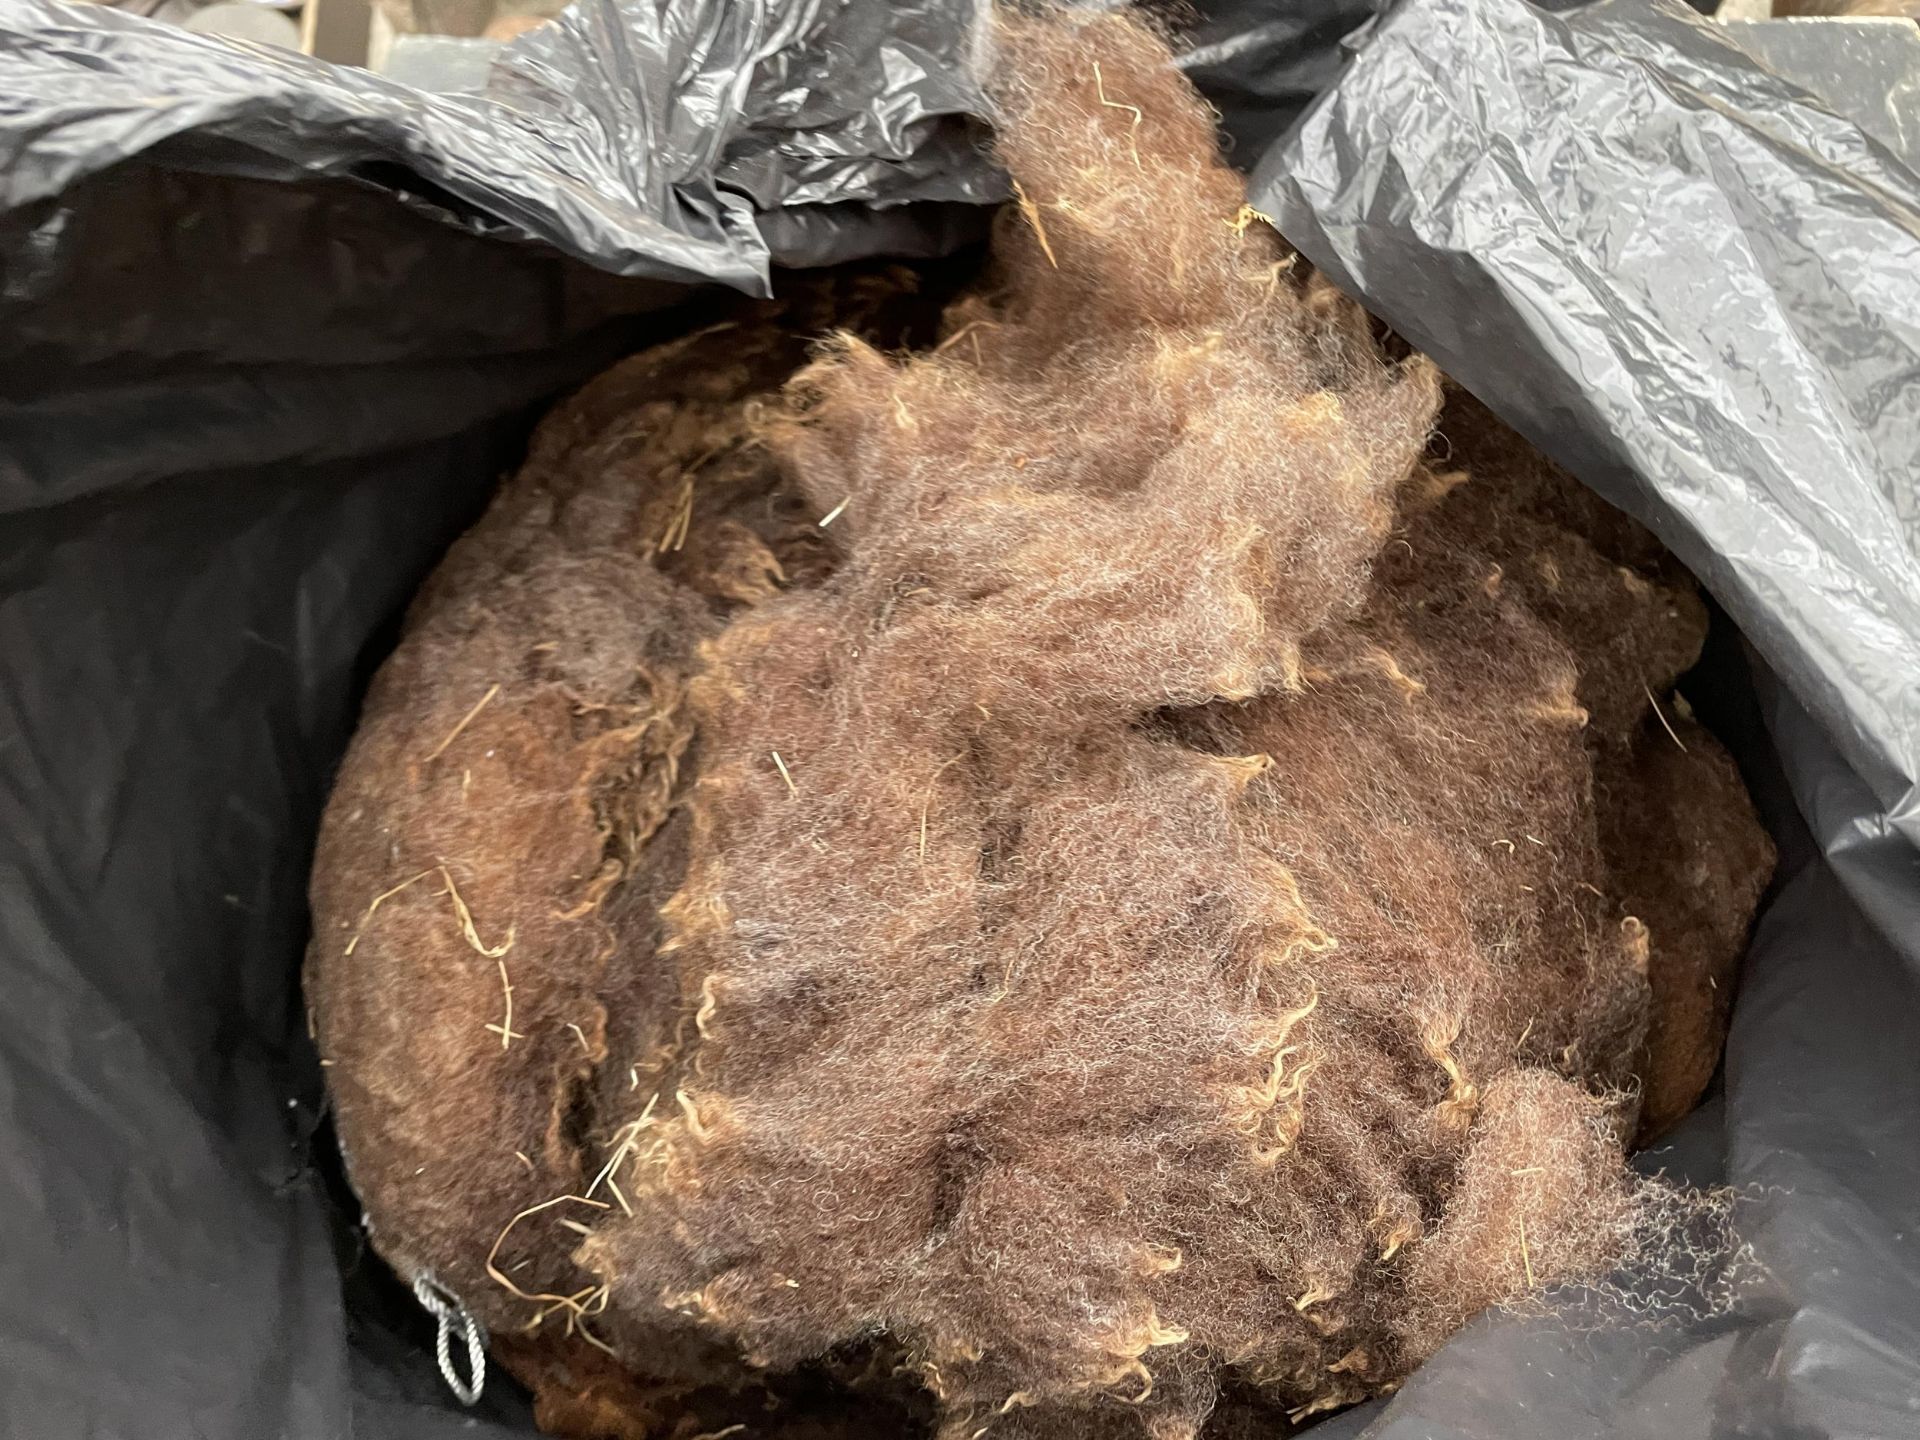 FOUR LARGE BAGS OF SHEEPS WOOL FOR SPINNING - Image 3 of 3